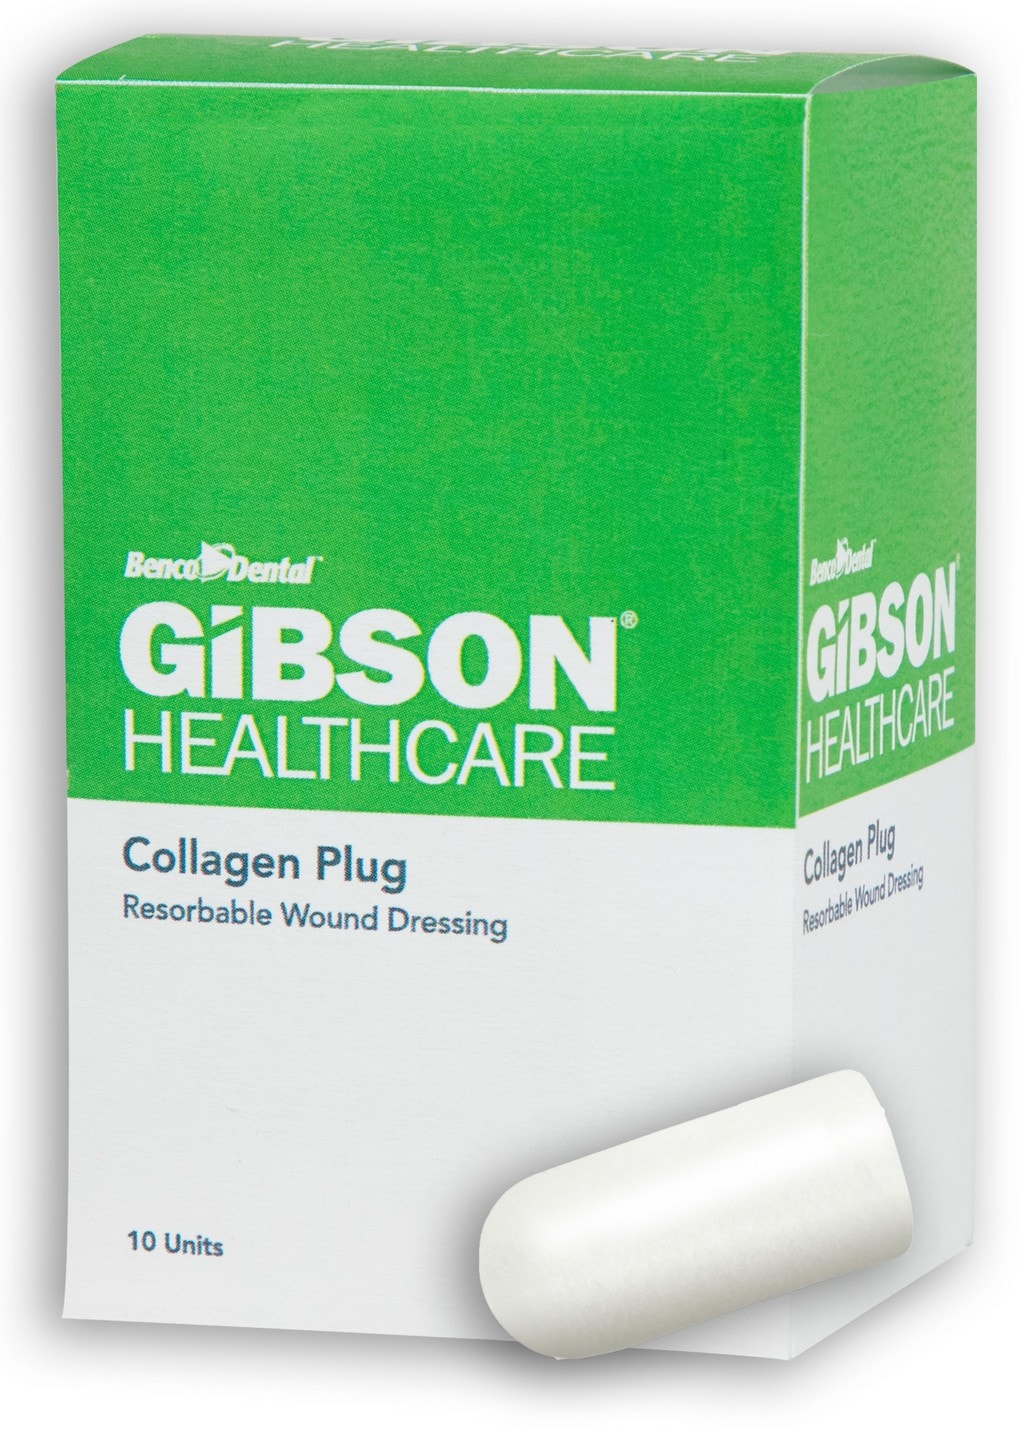 Product image of the green and white box of Collagen Plugs from Gibson Healthcare.